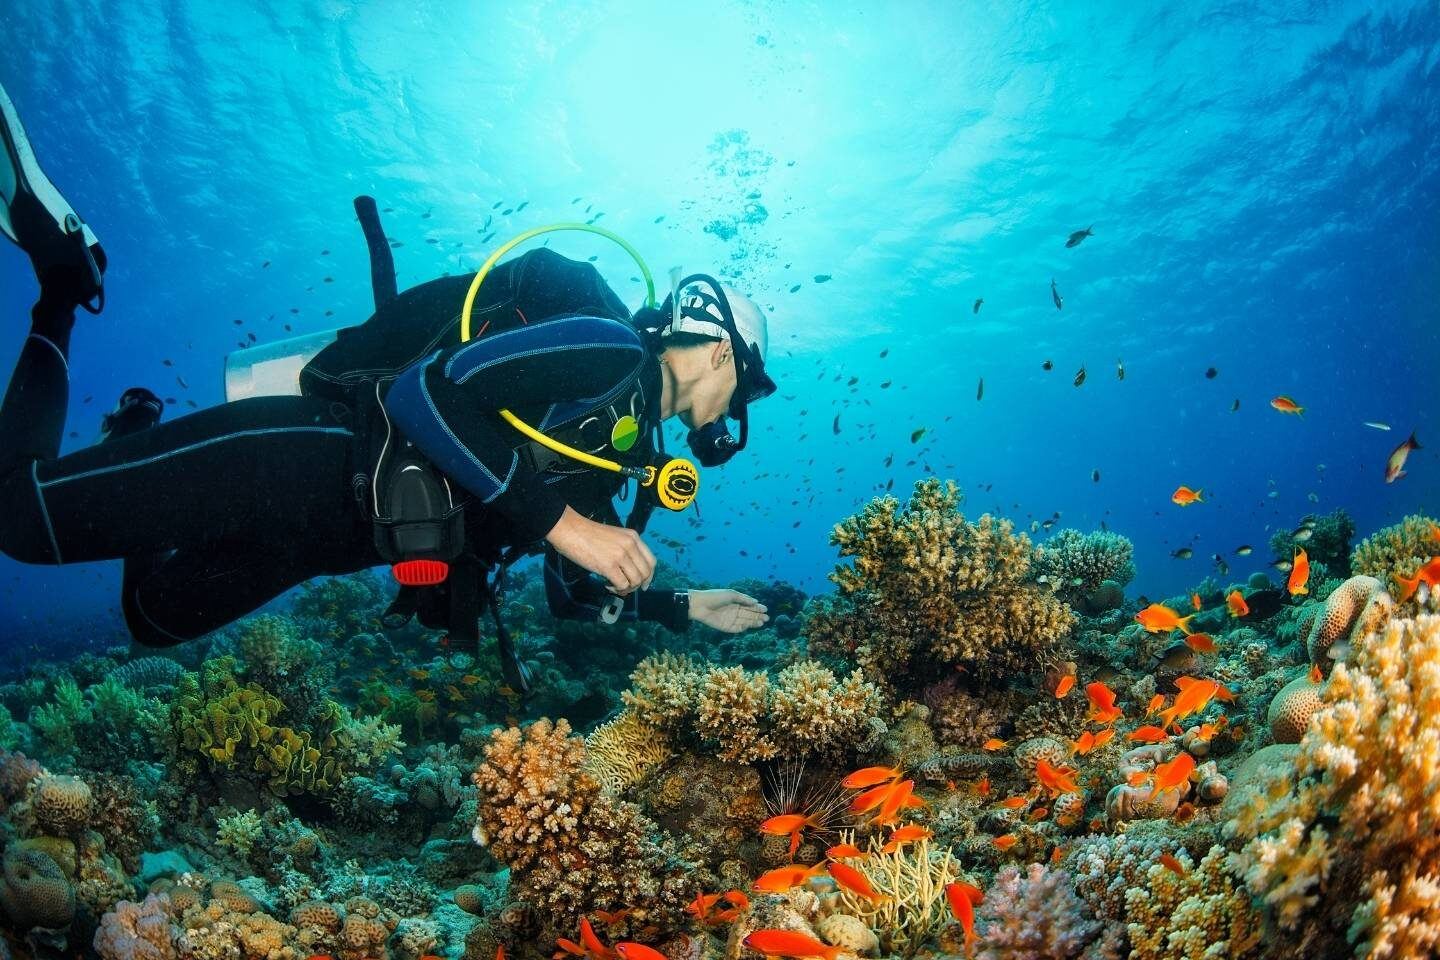 The Thrilling World of Scuba Diving Awaits